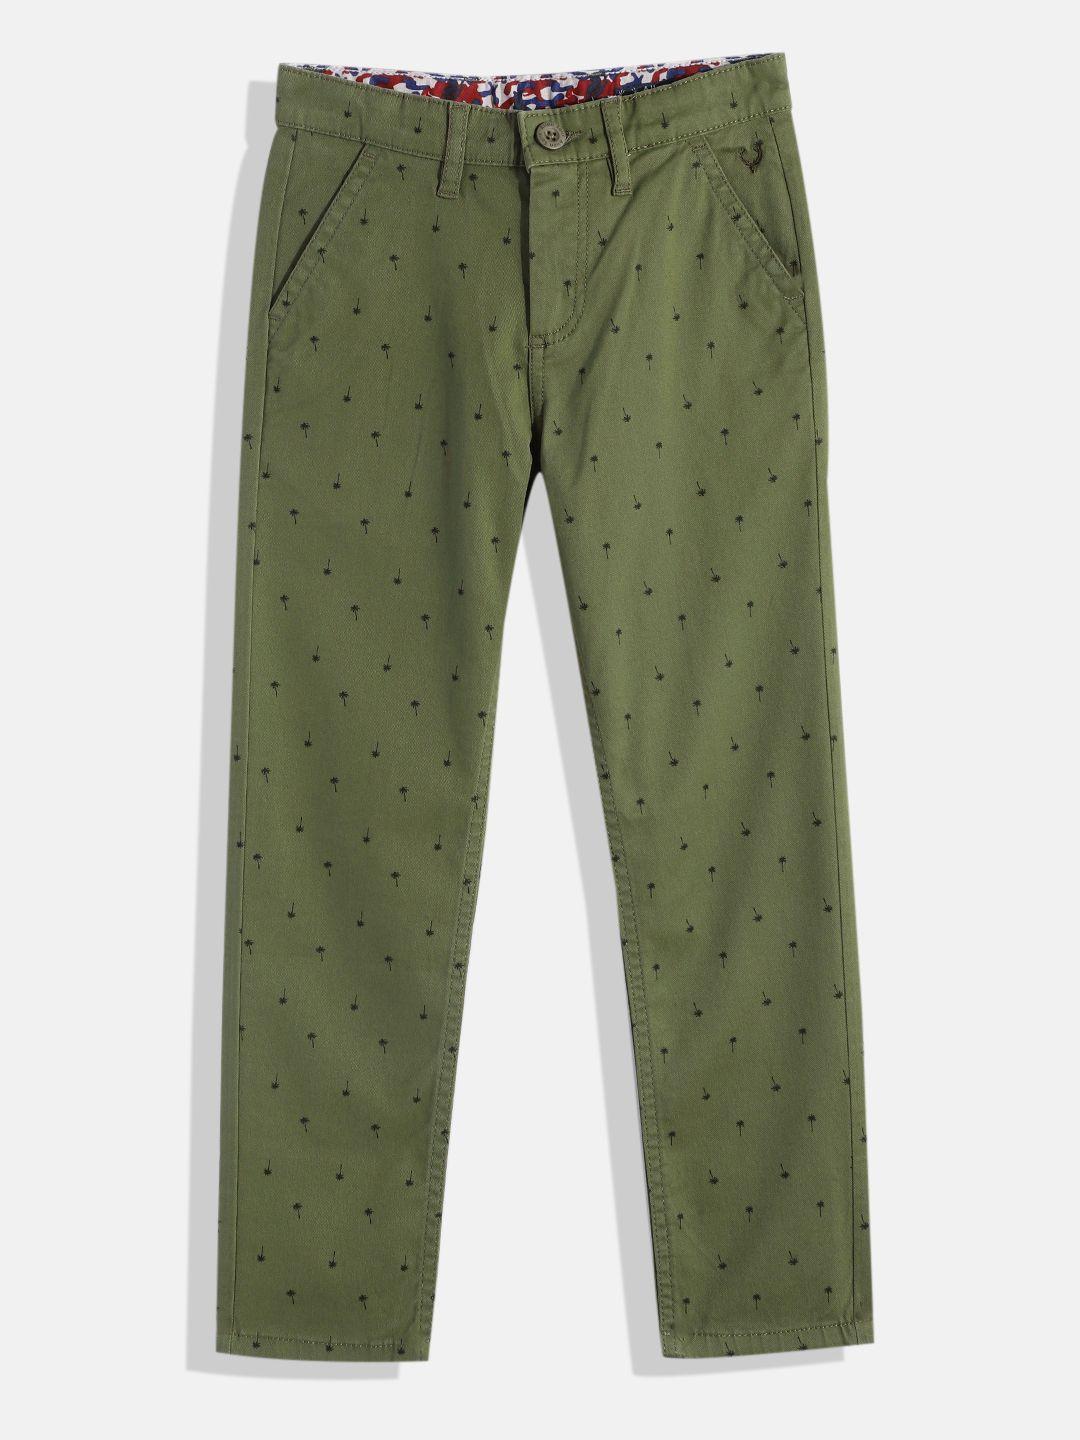 allen solly junior boys tropical printed trousers